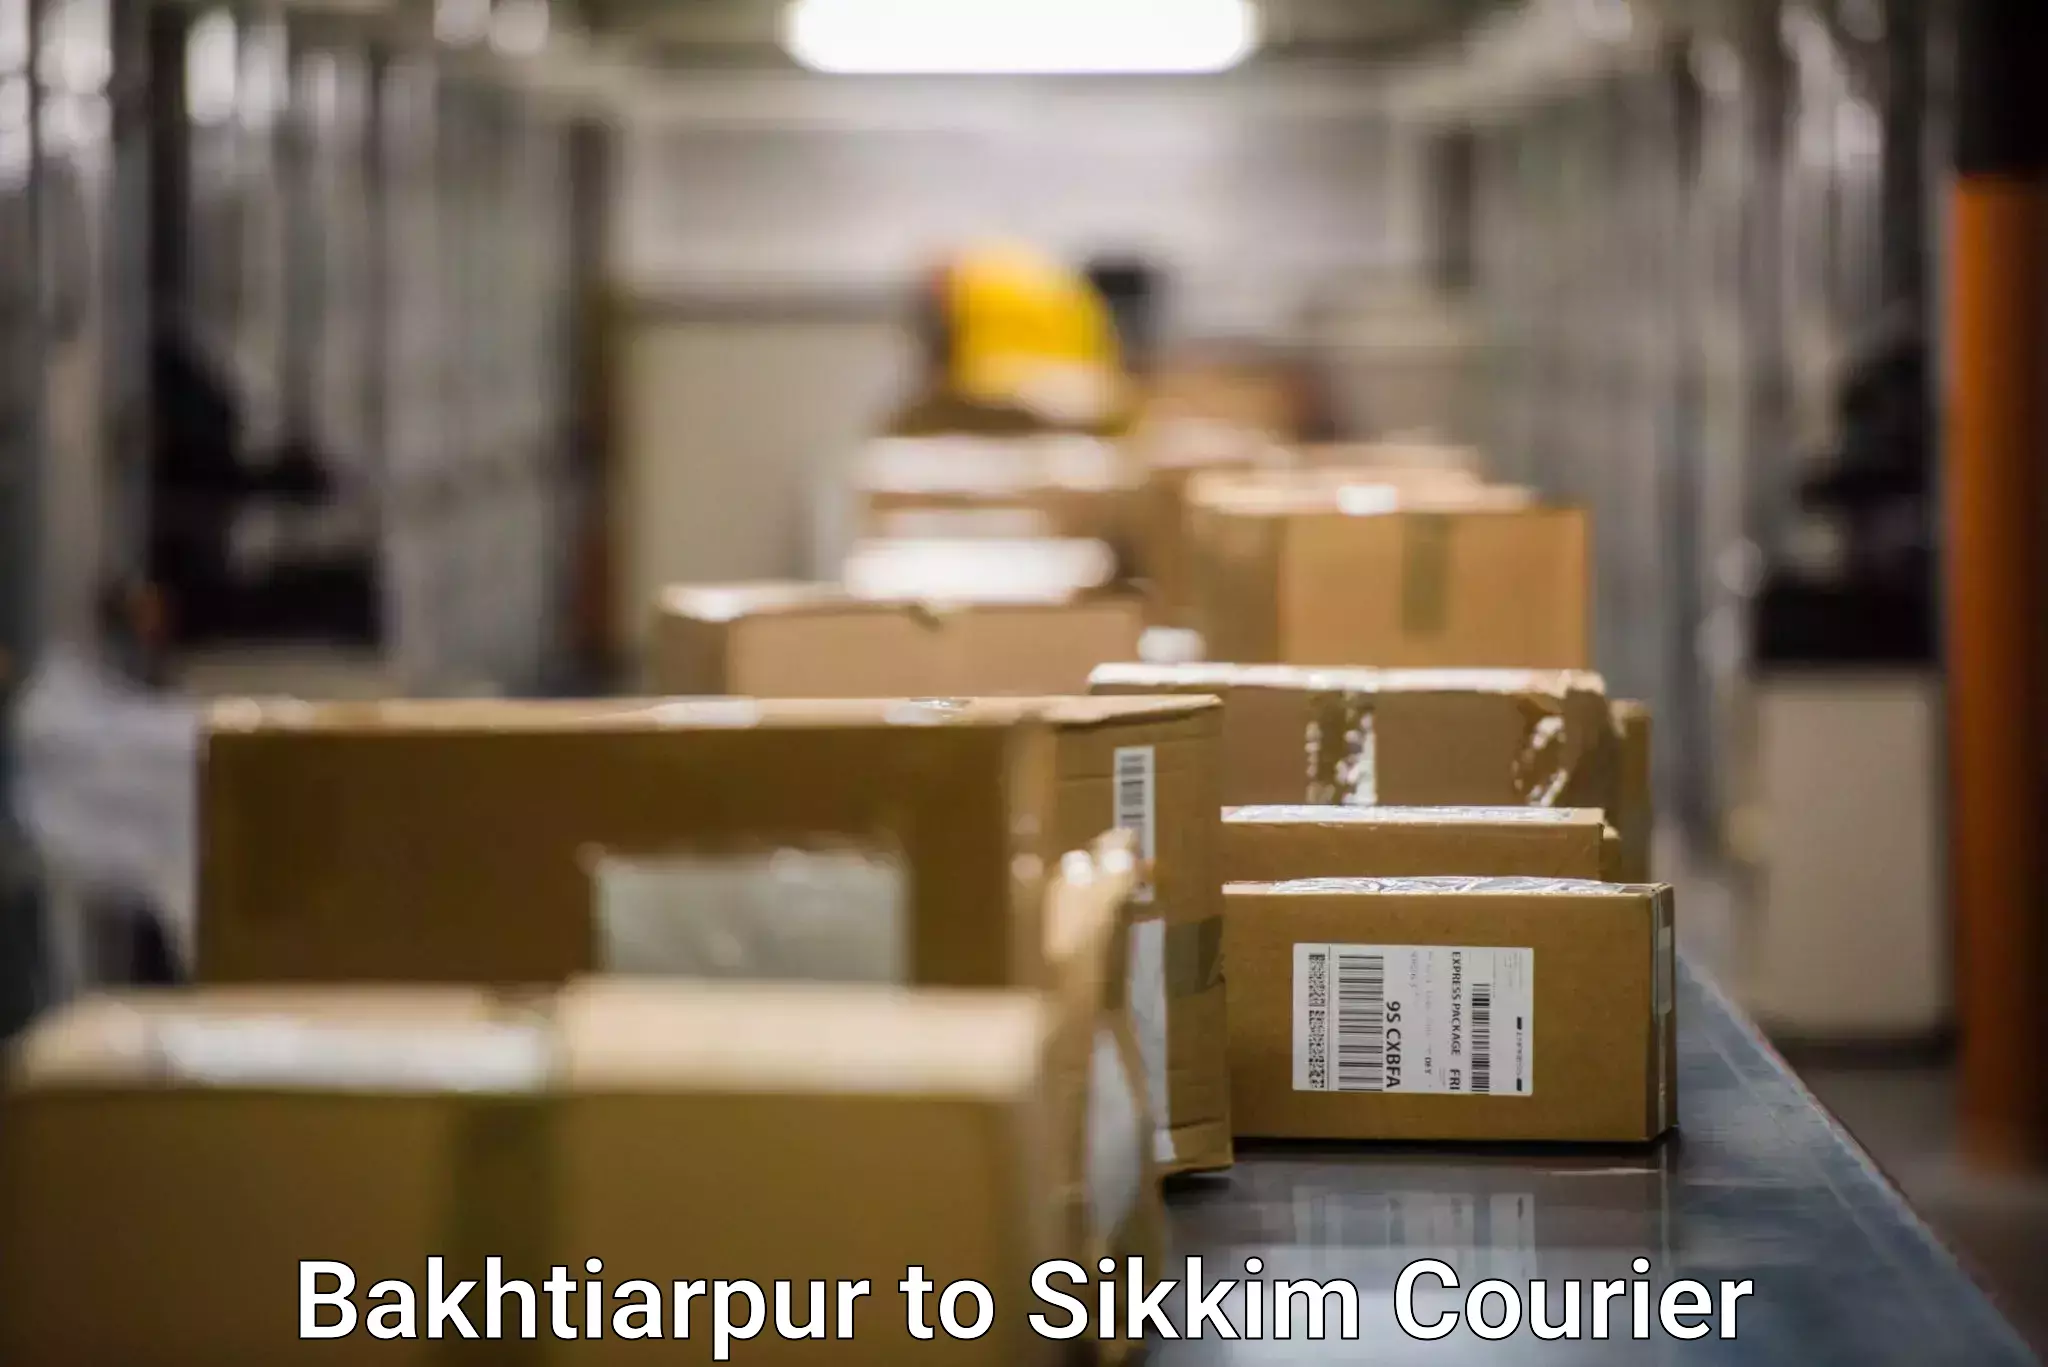 High-priority parcel service Bakhtiarpur to East Sikkim